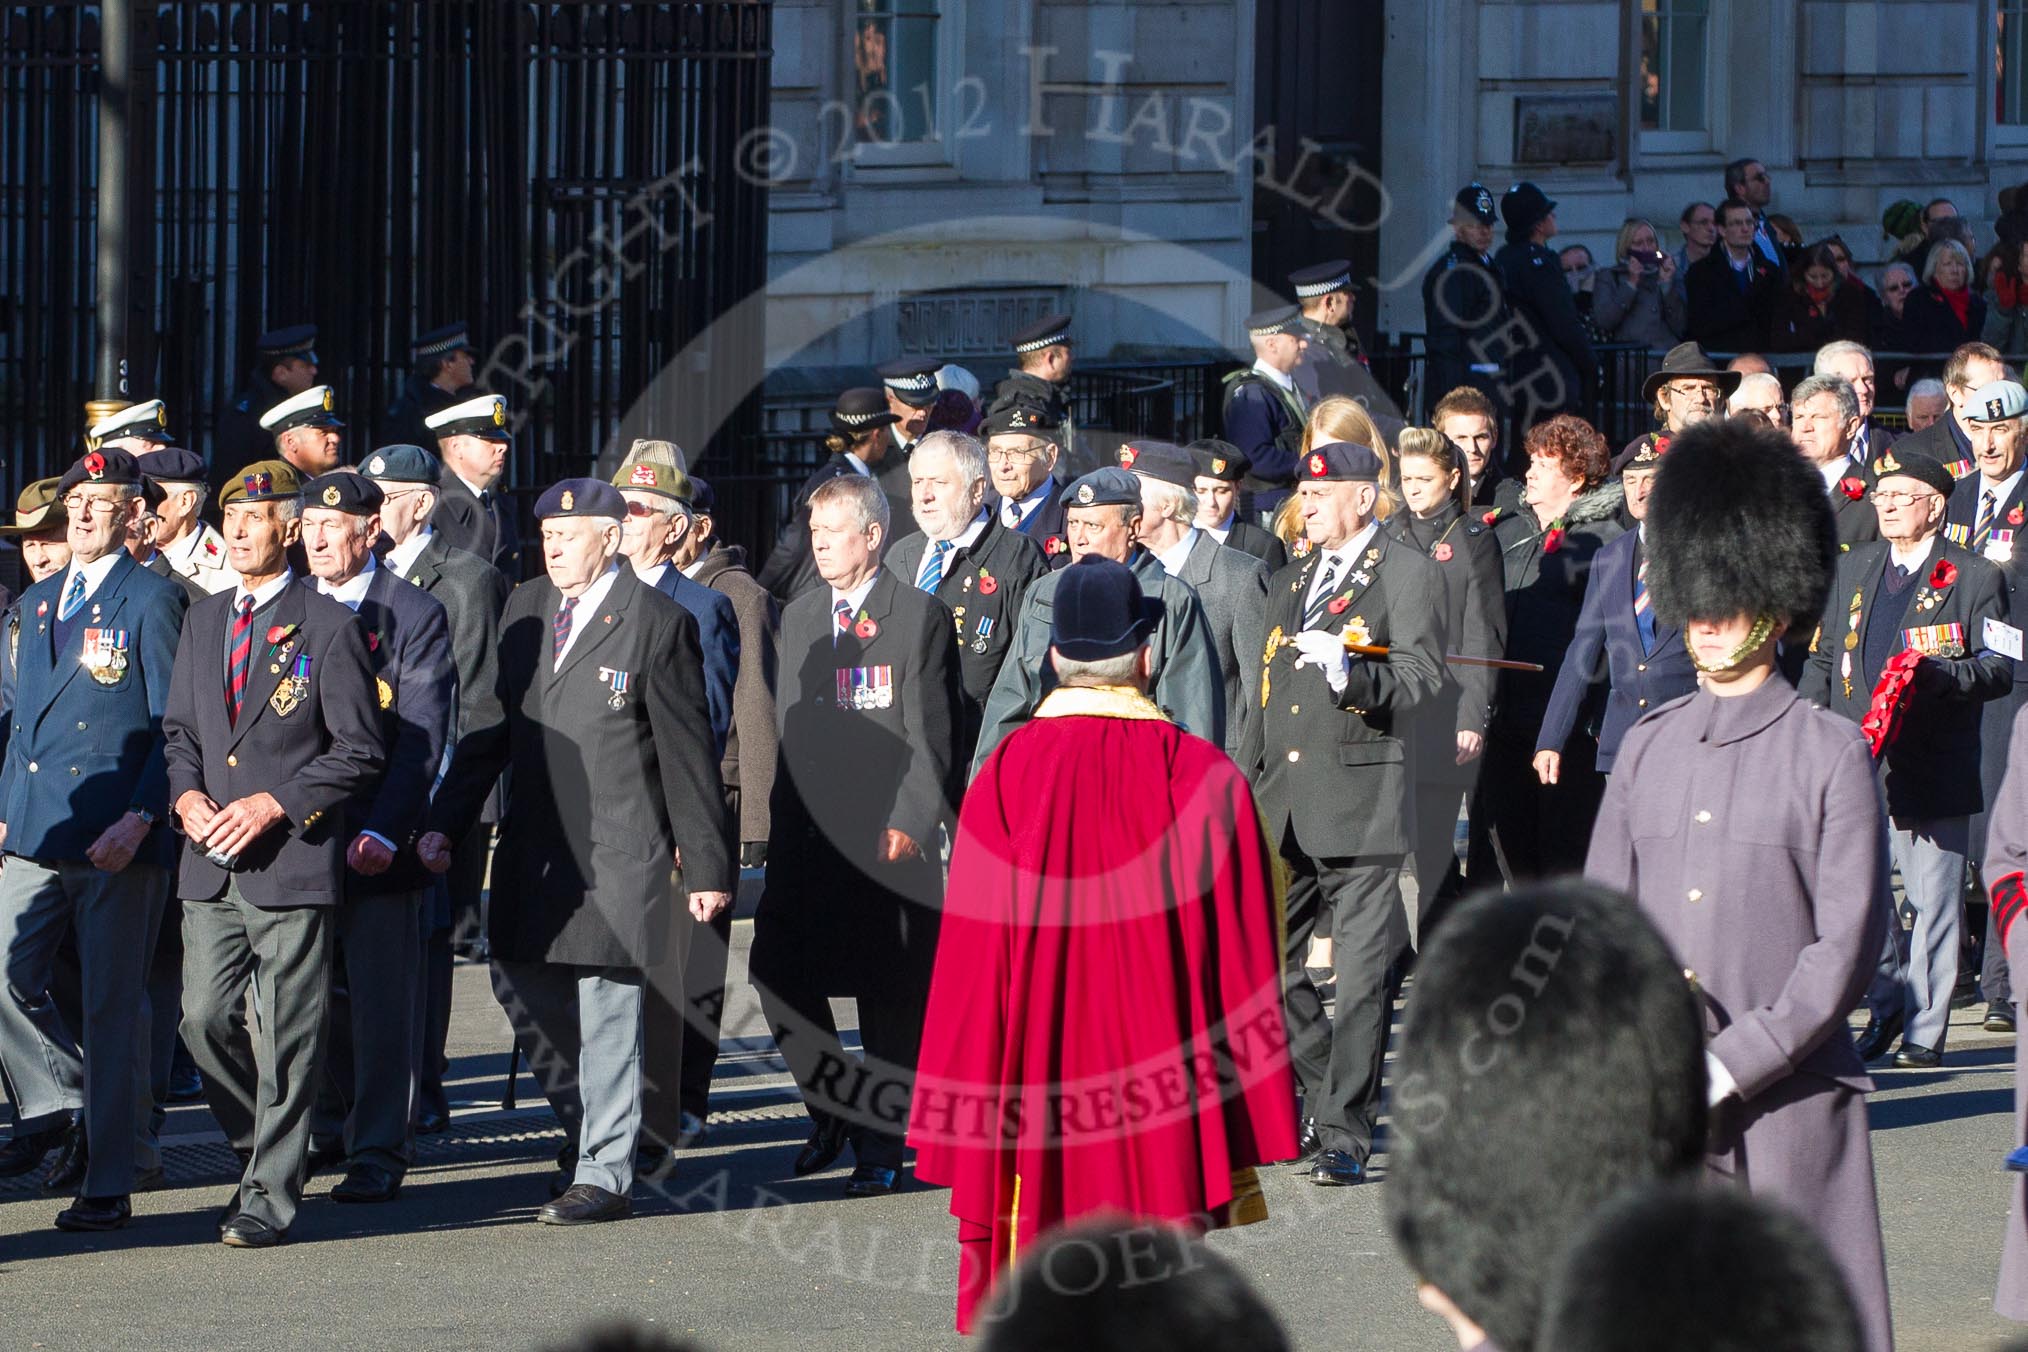 Remembrance Sunday 2012 Cenotaph March Past: Group F10 - National Service Veterans Alliance..
Whitehall, Cenotaph,
London SW1,

United Kingdom,
on 11 November 2012 at 11:46, image #449